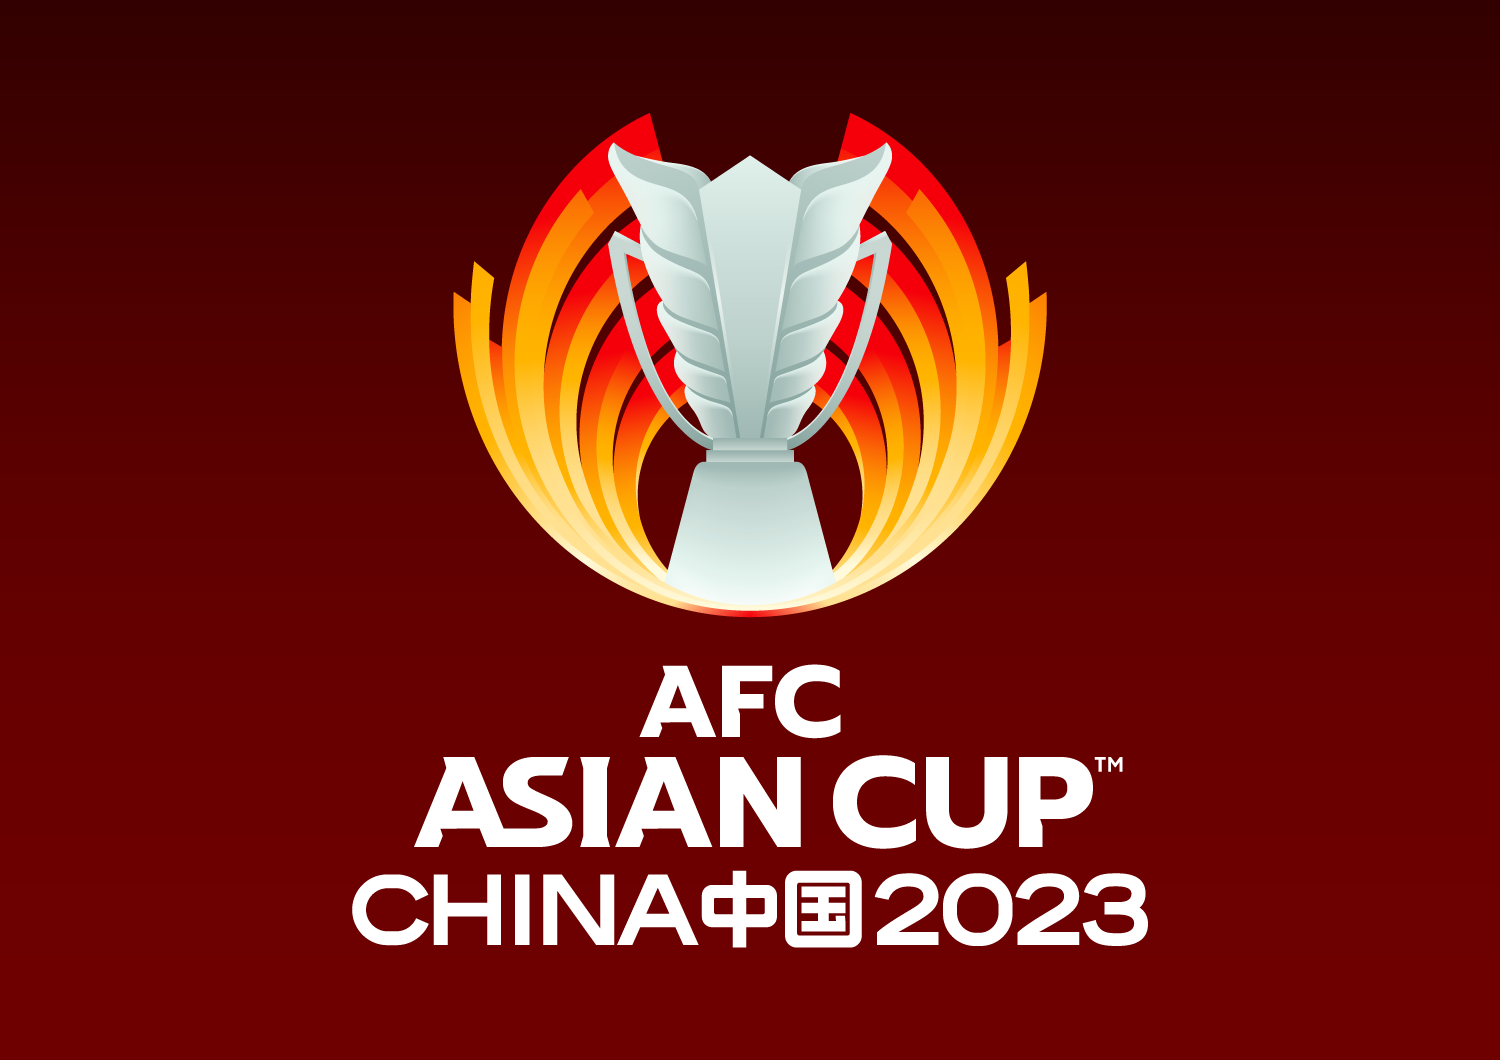 AFC Asian Cup China 2023 logo launched at opening Shanghai Pudong